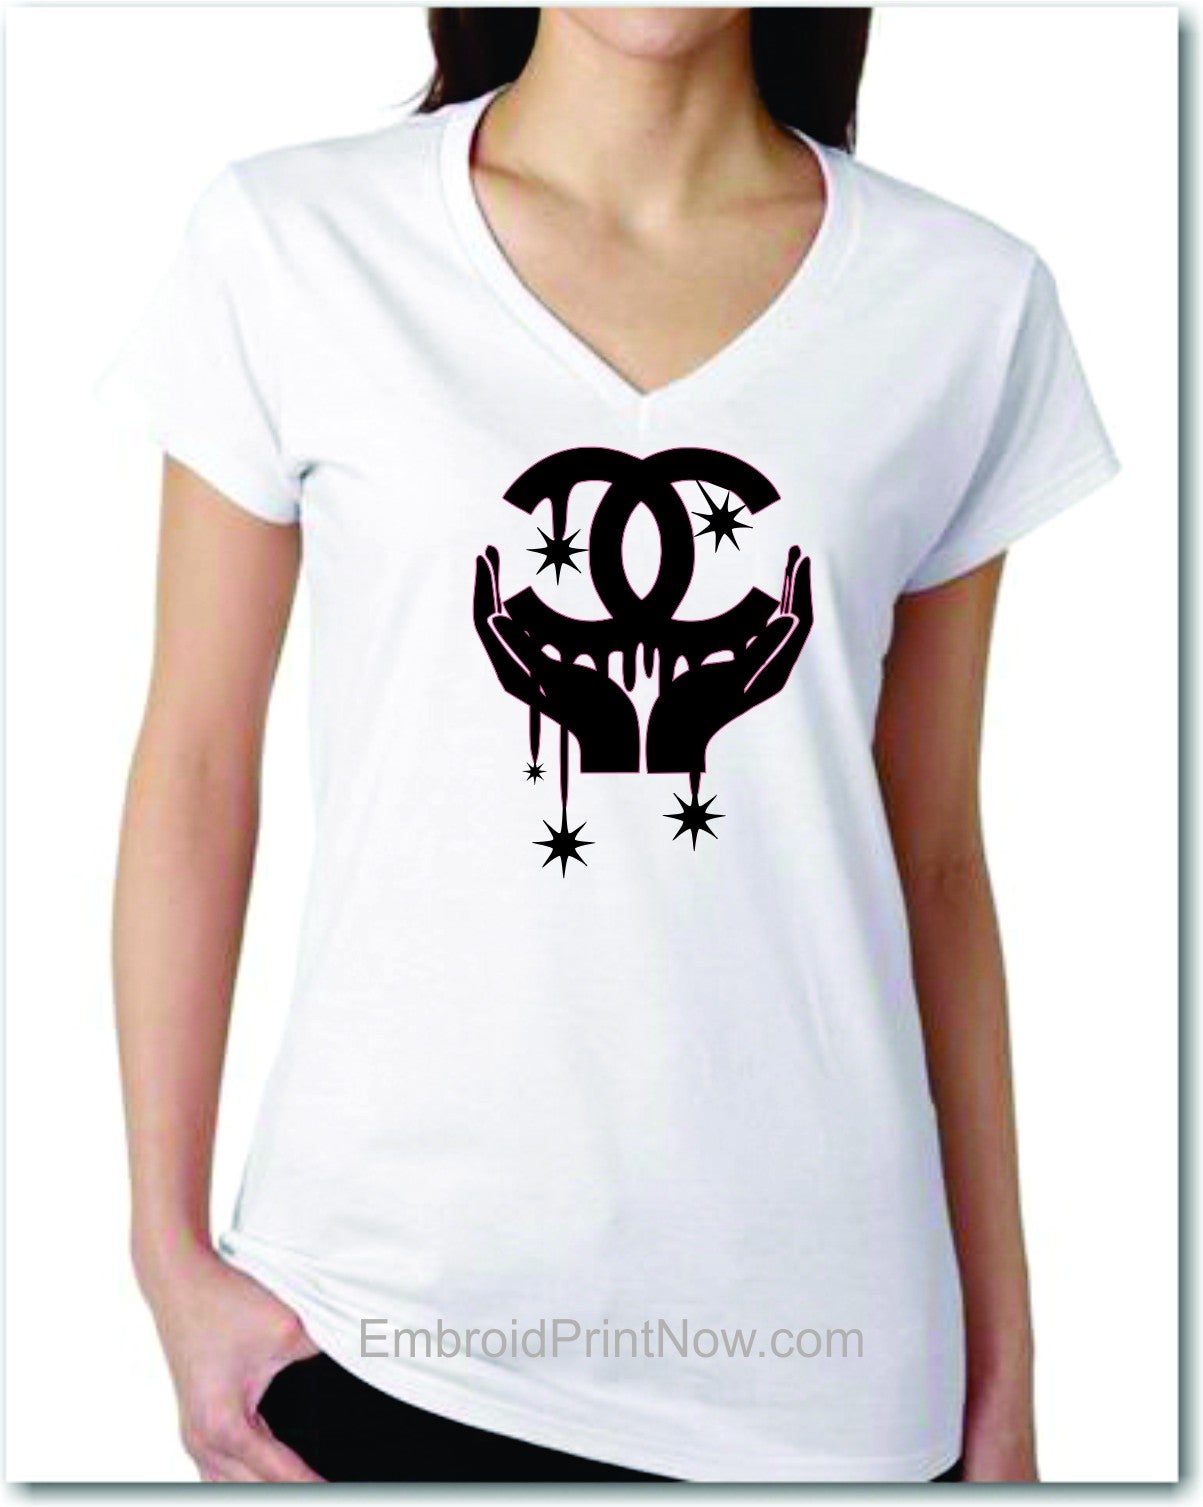 Diy Chanel T Shirt · How To Paint A T Shirt · Stencilling on Cut Out + Keep